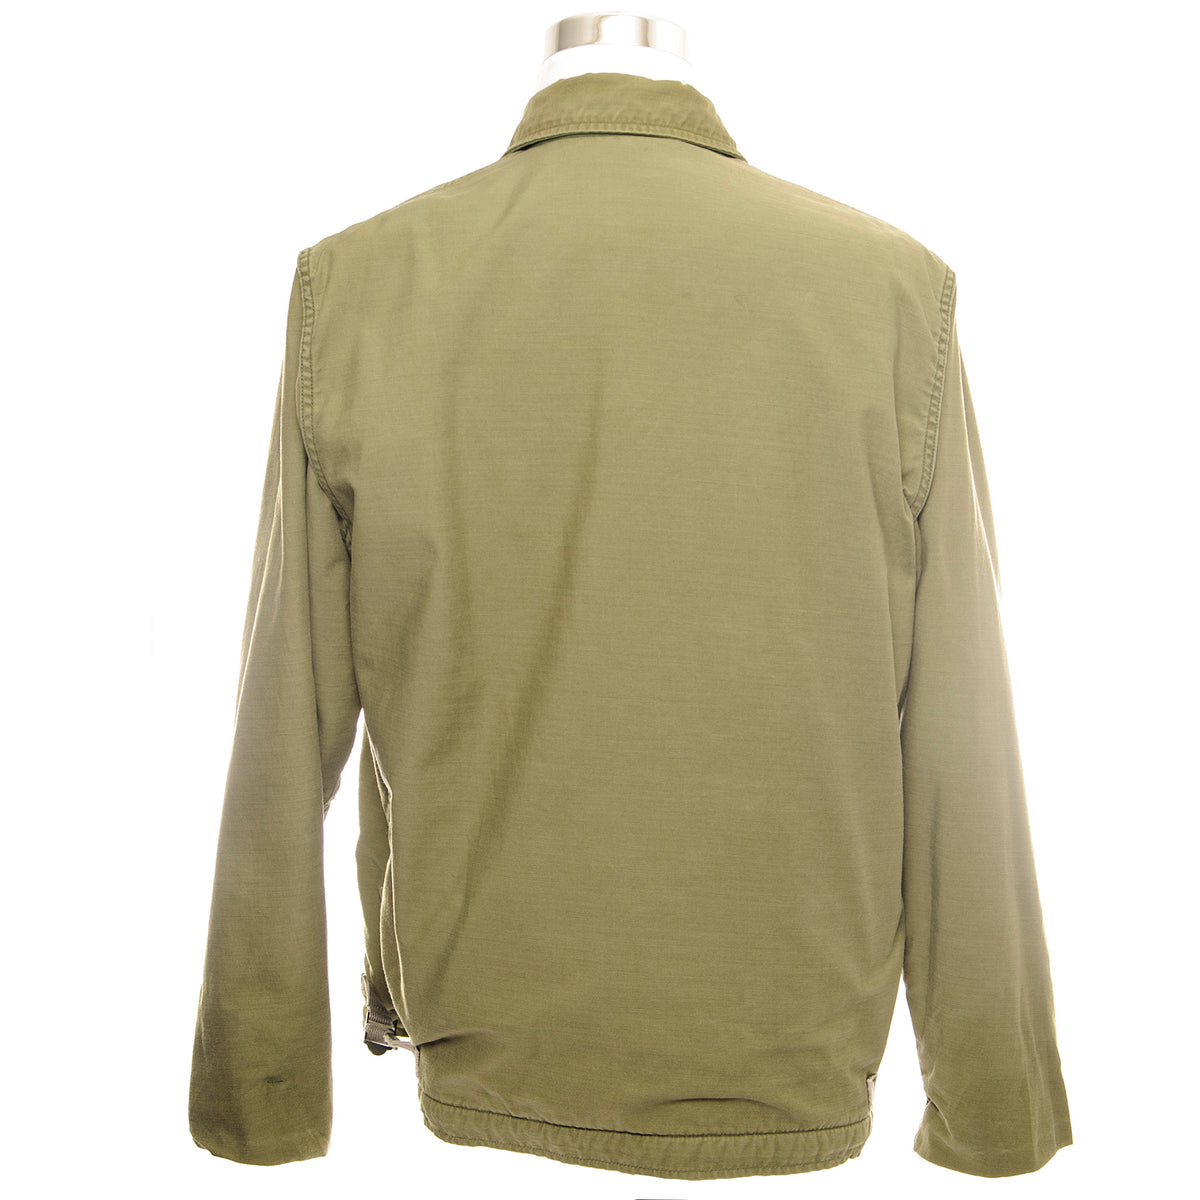 US NAVY A-2 DECK JACKET 総合ショッピングサイト - www